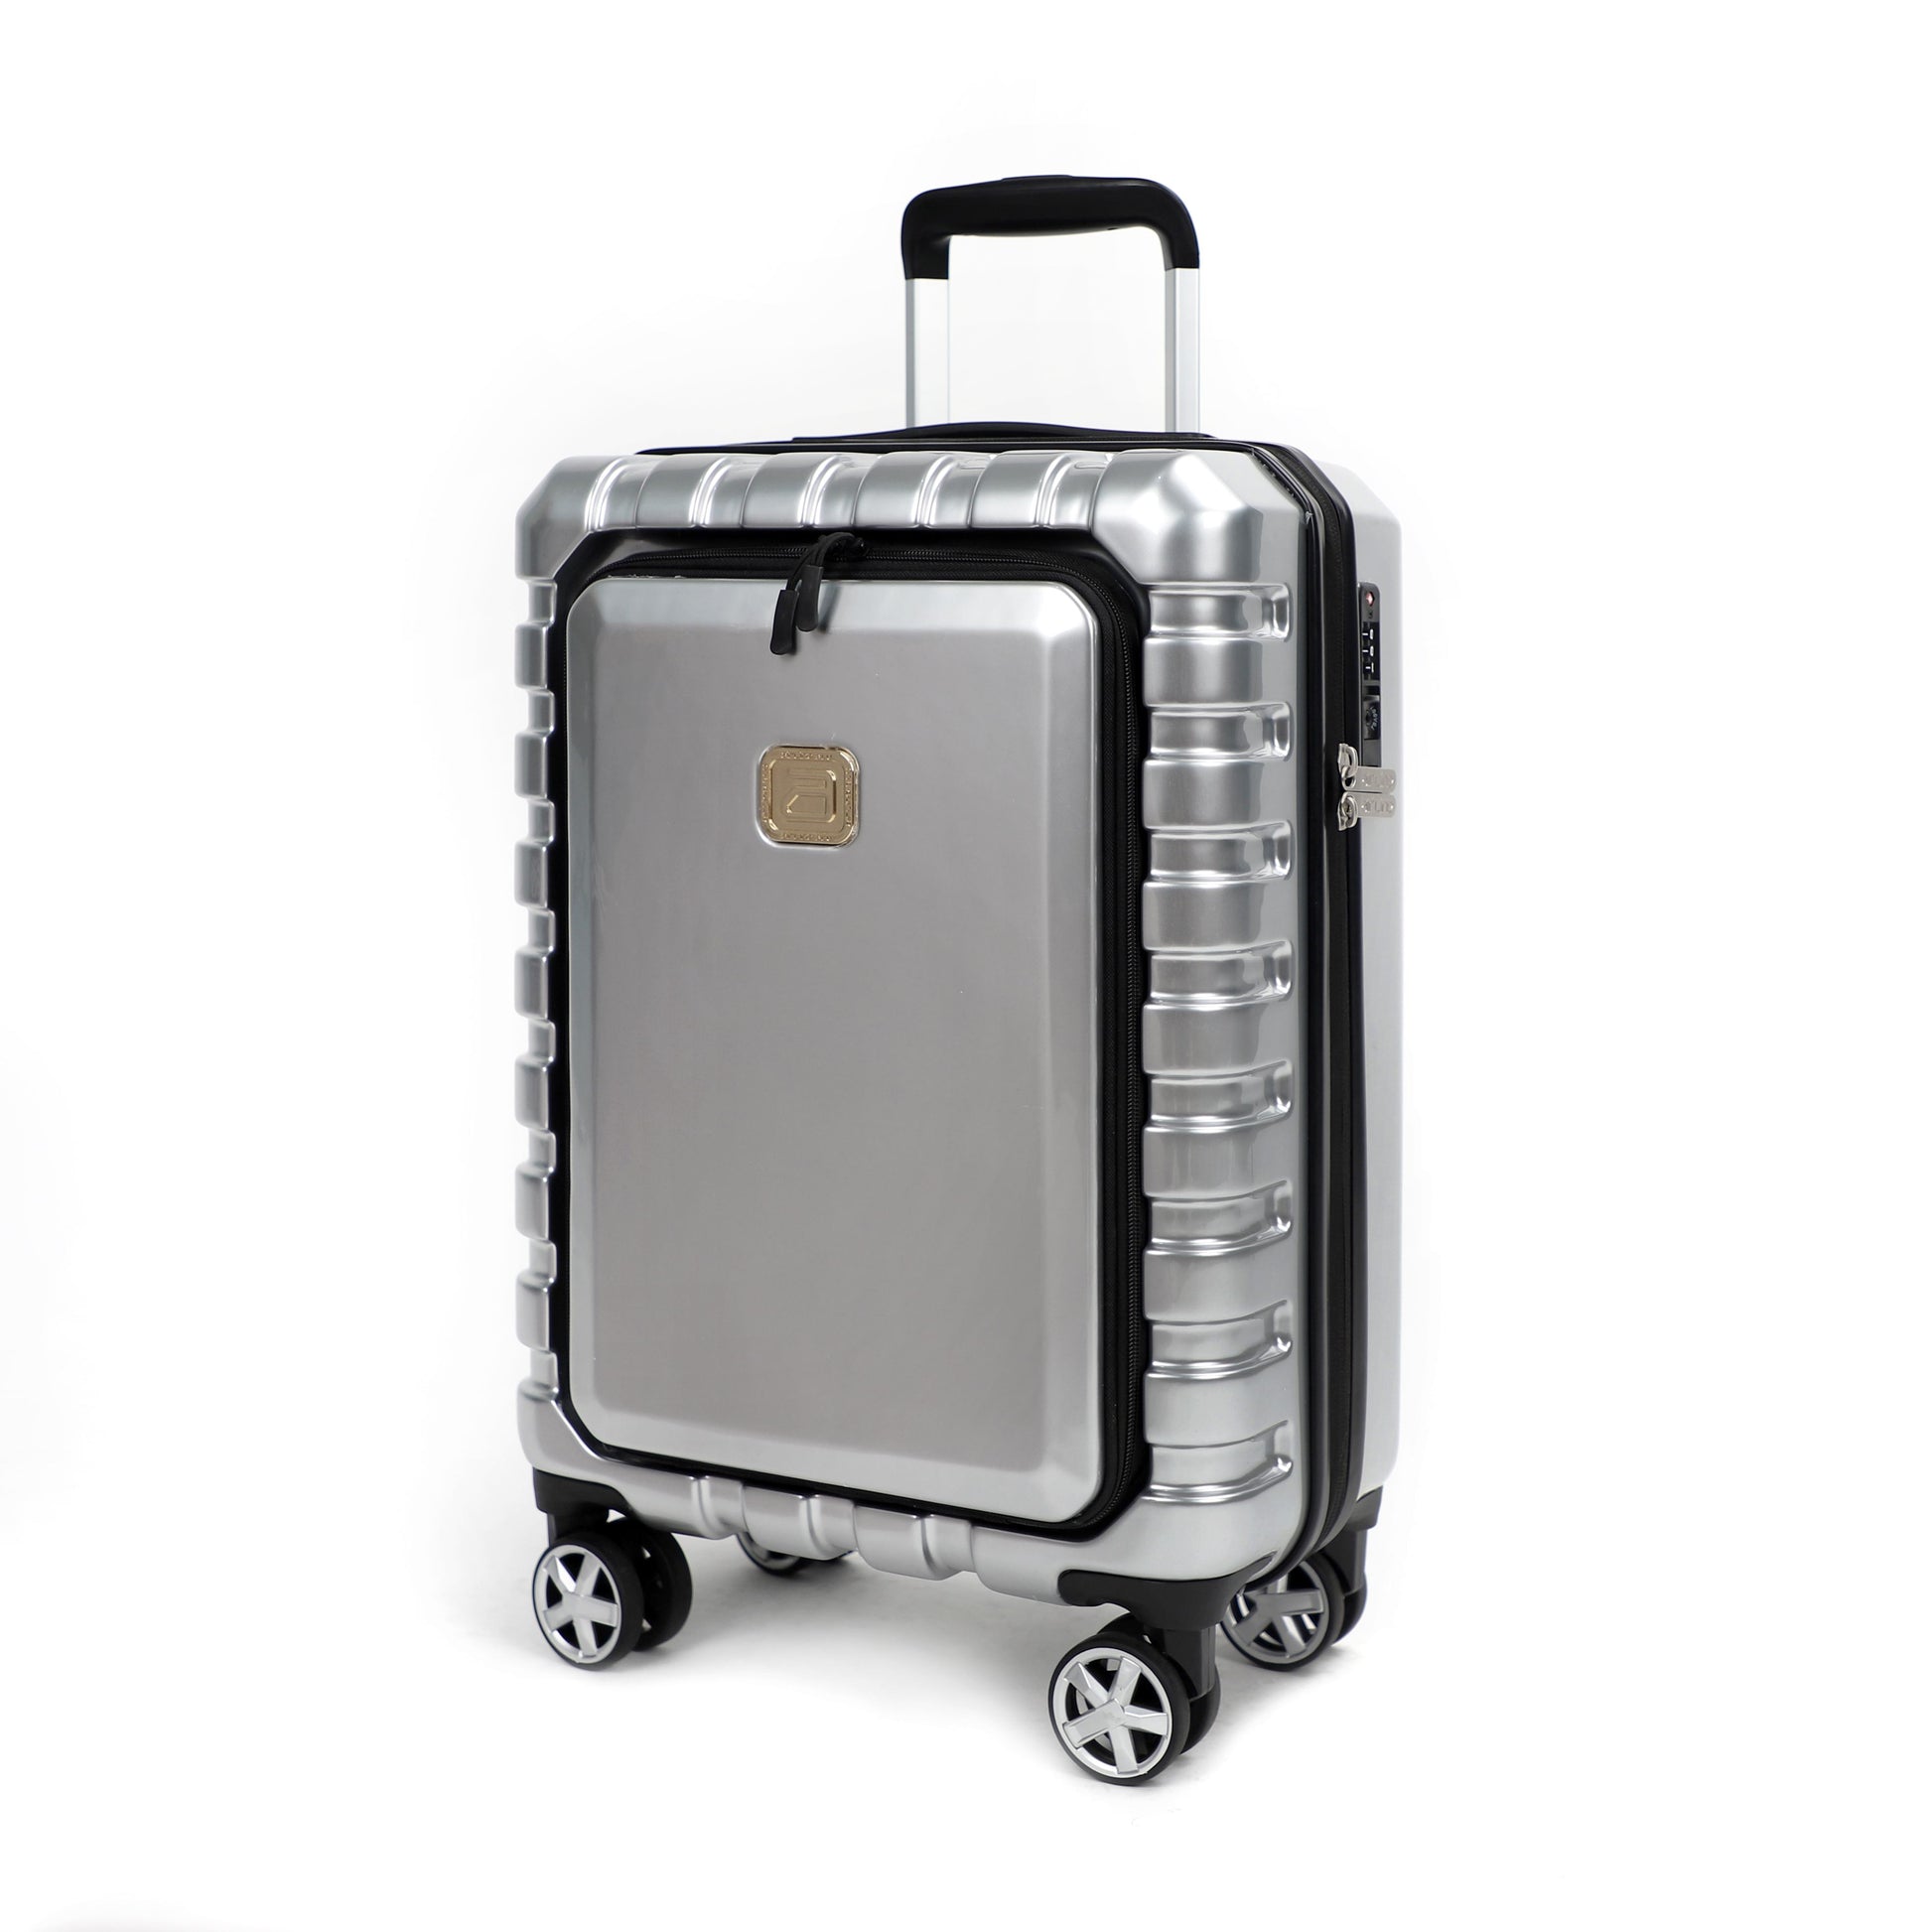 Airline_Carry_On_Luggage_Silver_Side_view_T1978155103